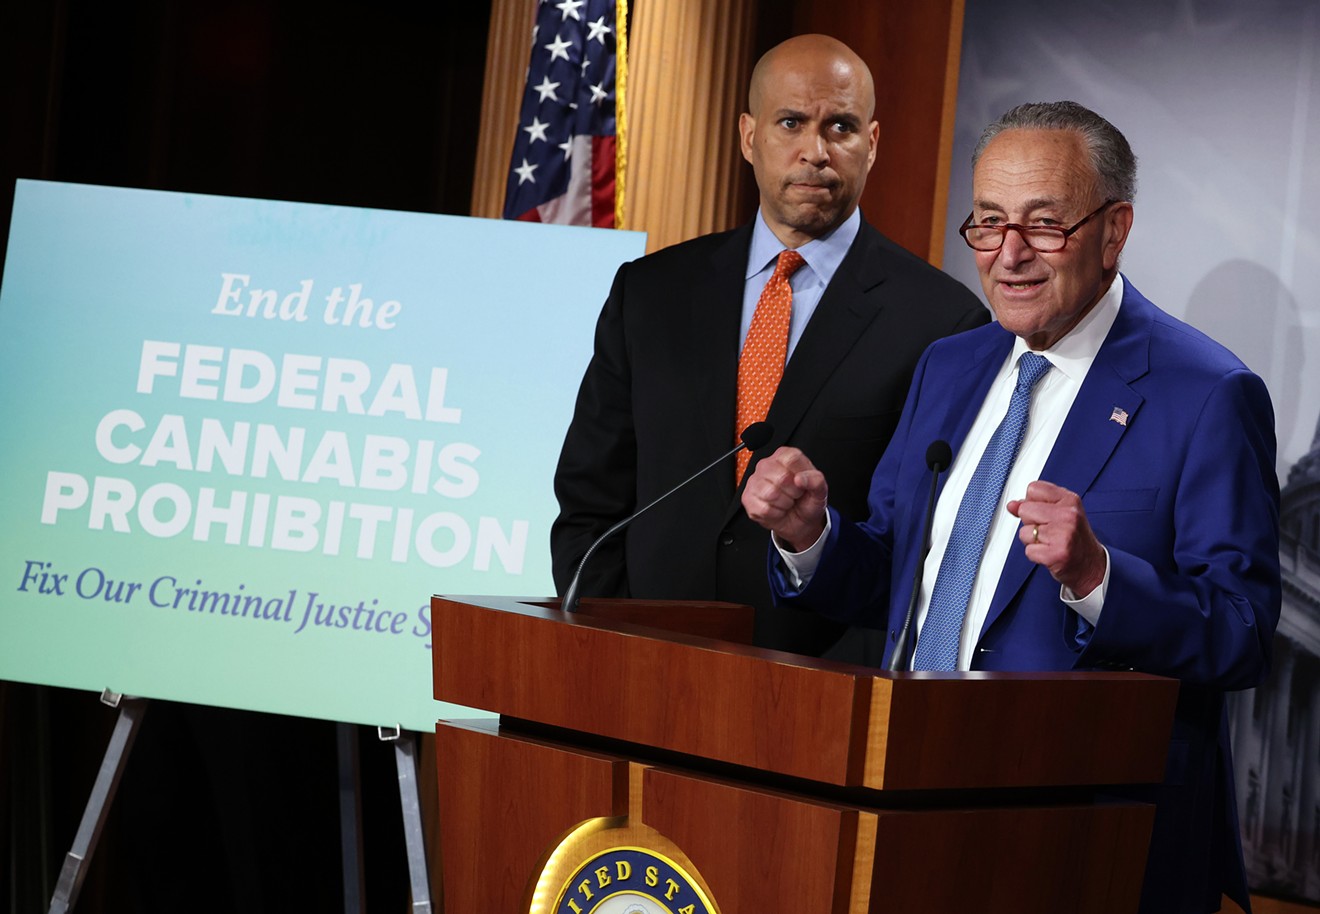 U.S. Senators Corey Booker (D-NJ) and Chuck Schumer (D-NY)  at a July 2021 press conference on introducing legislation to end federal cannabis prohibition.